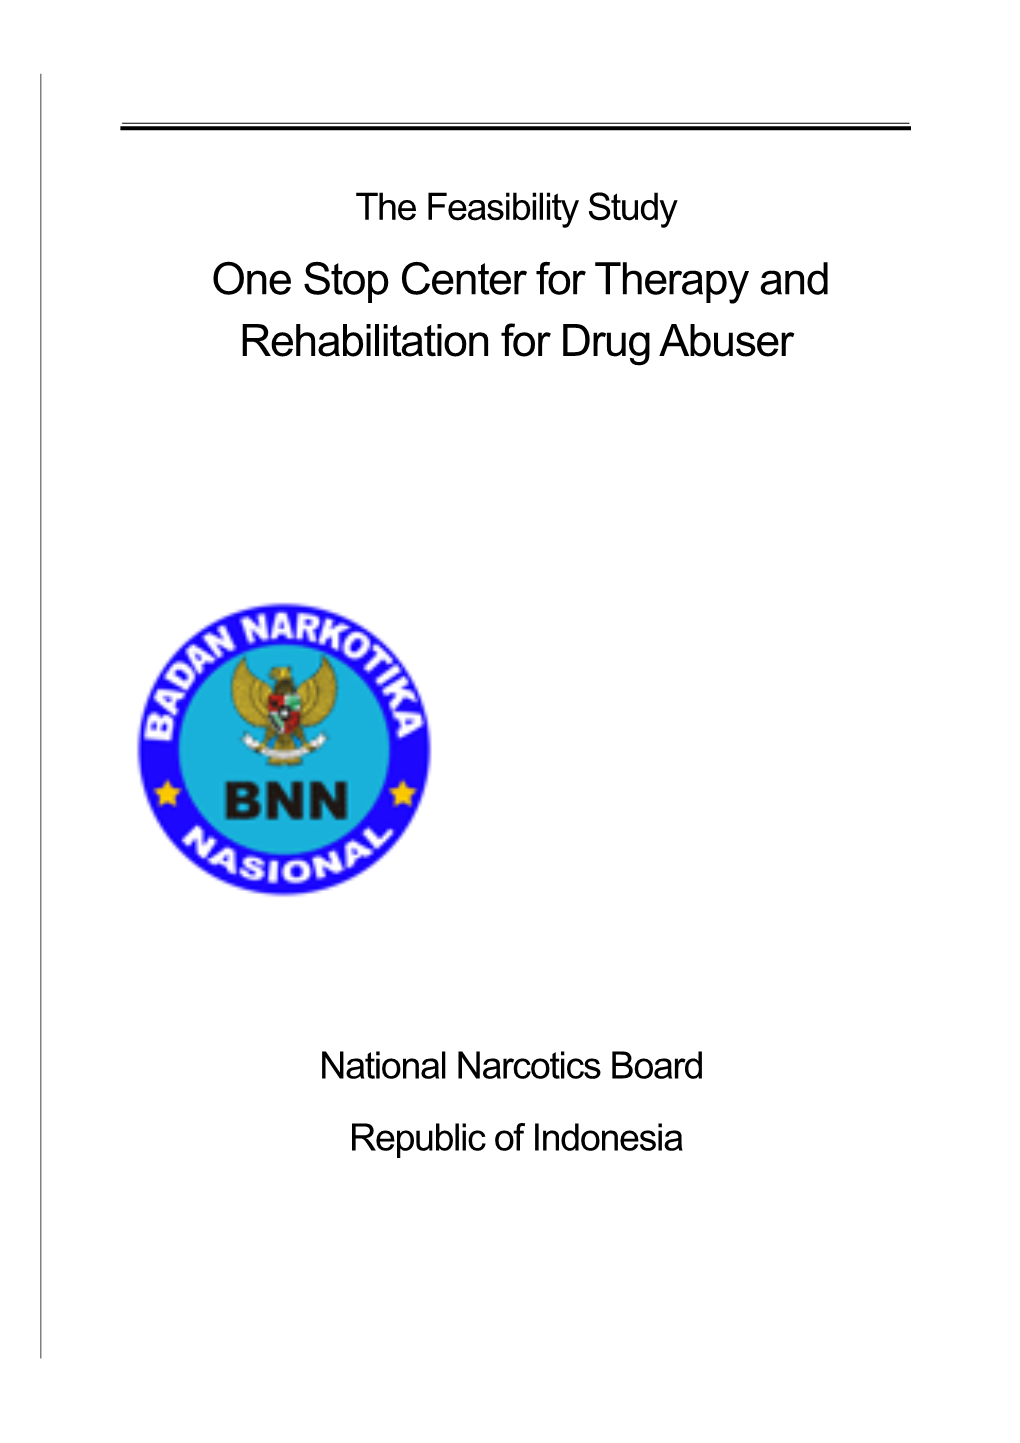 One Stopcenter for Therapy and Rehabilitation for Drug Abuser